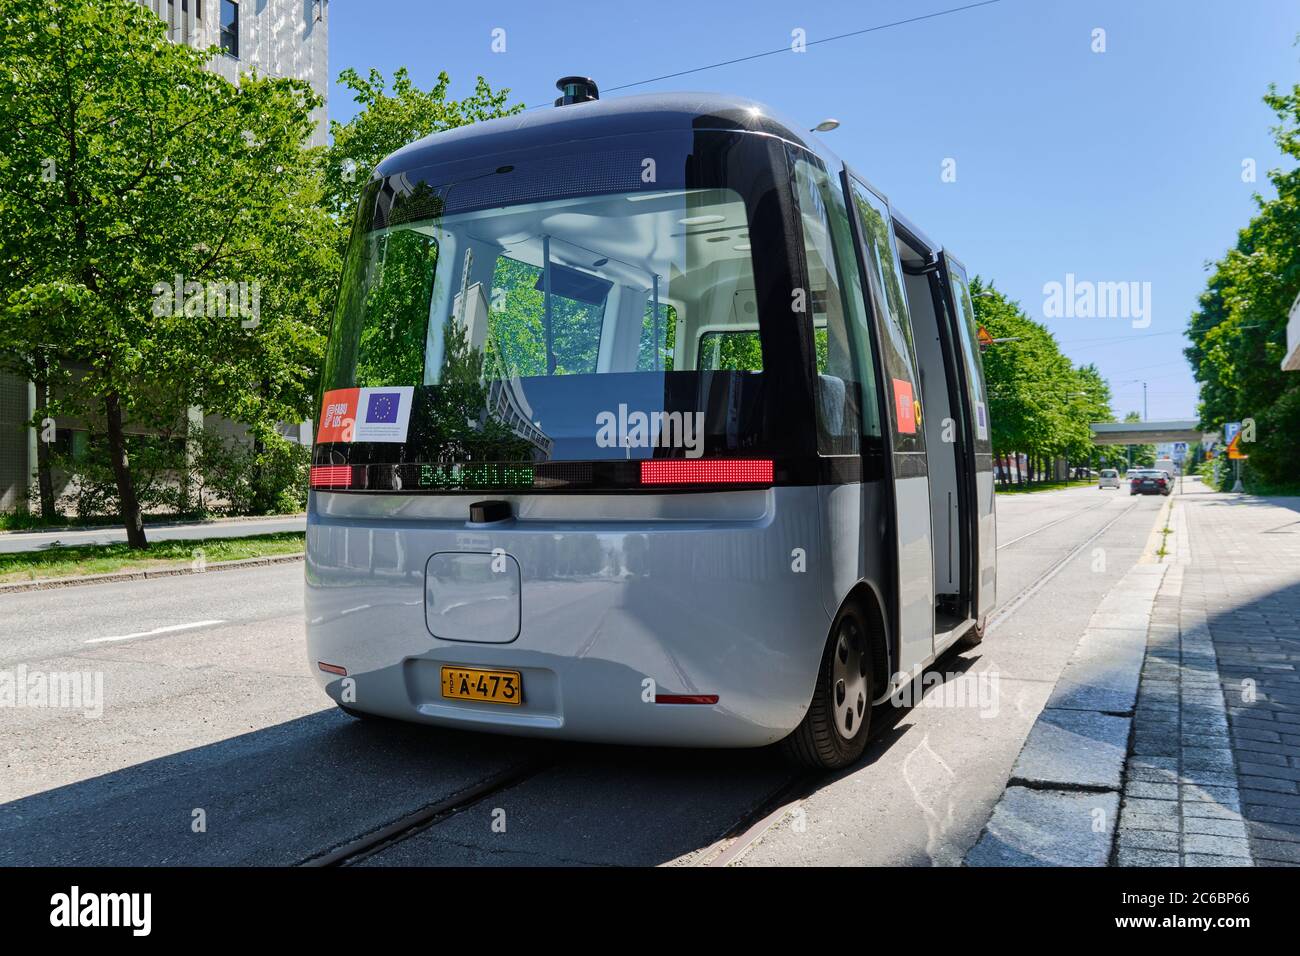 Helsinki, Finland - June 12, 2020: The FABULOS Project - testing self-driving bus in city street in Pasila district. Stock Photo